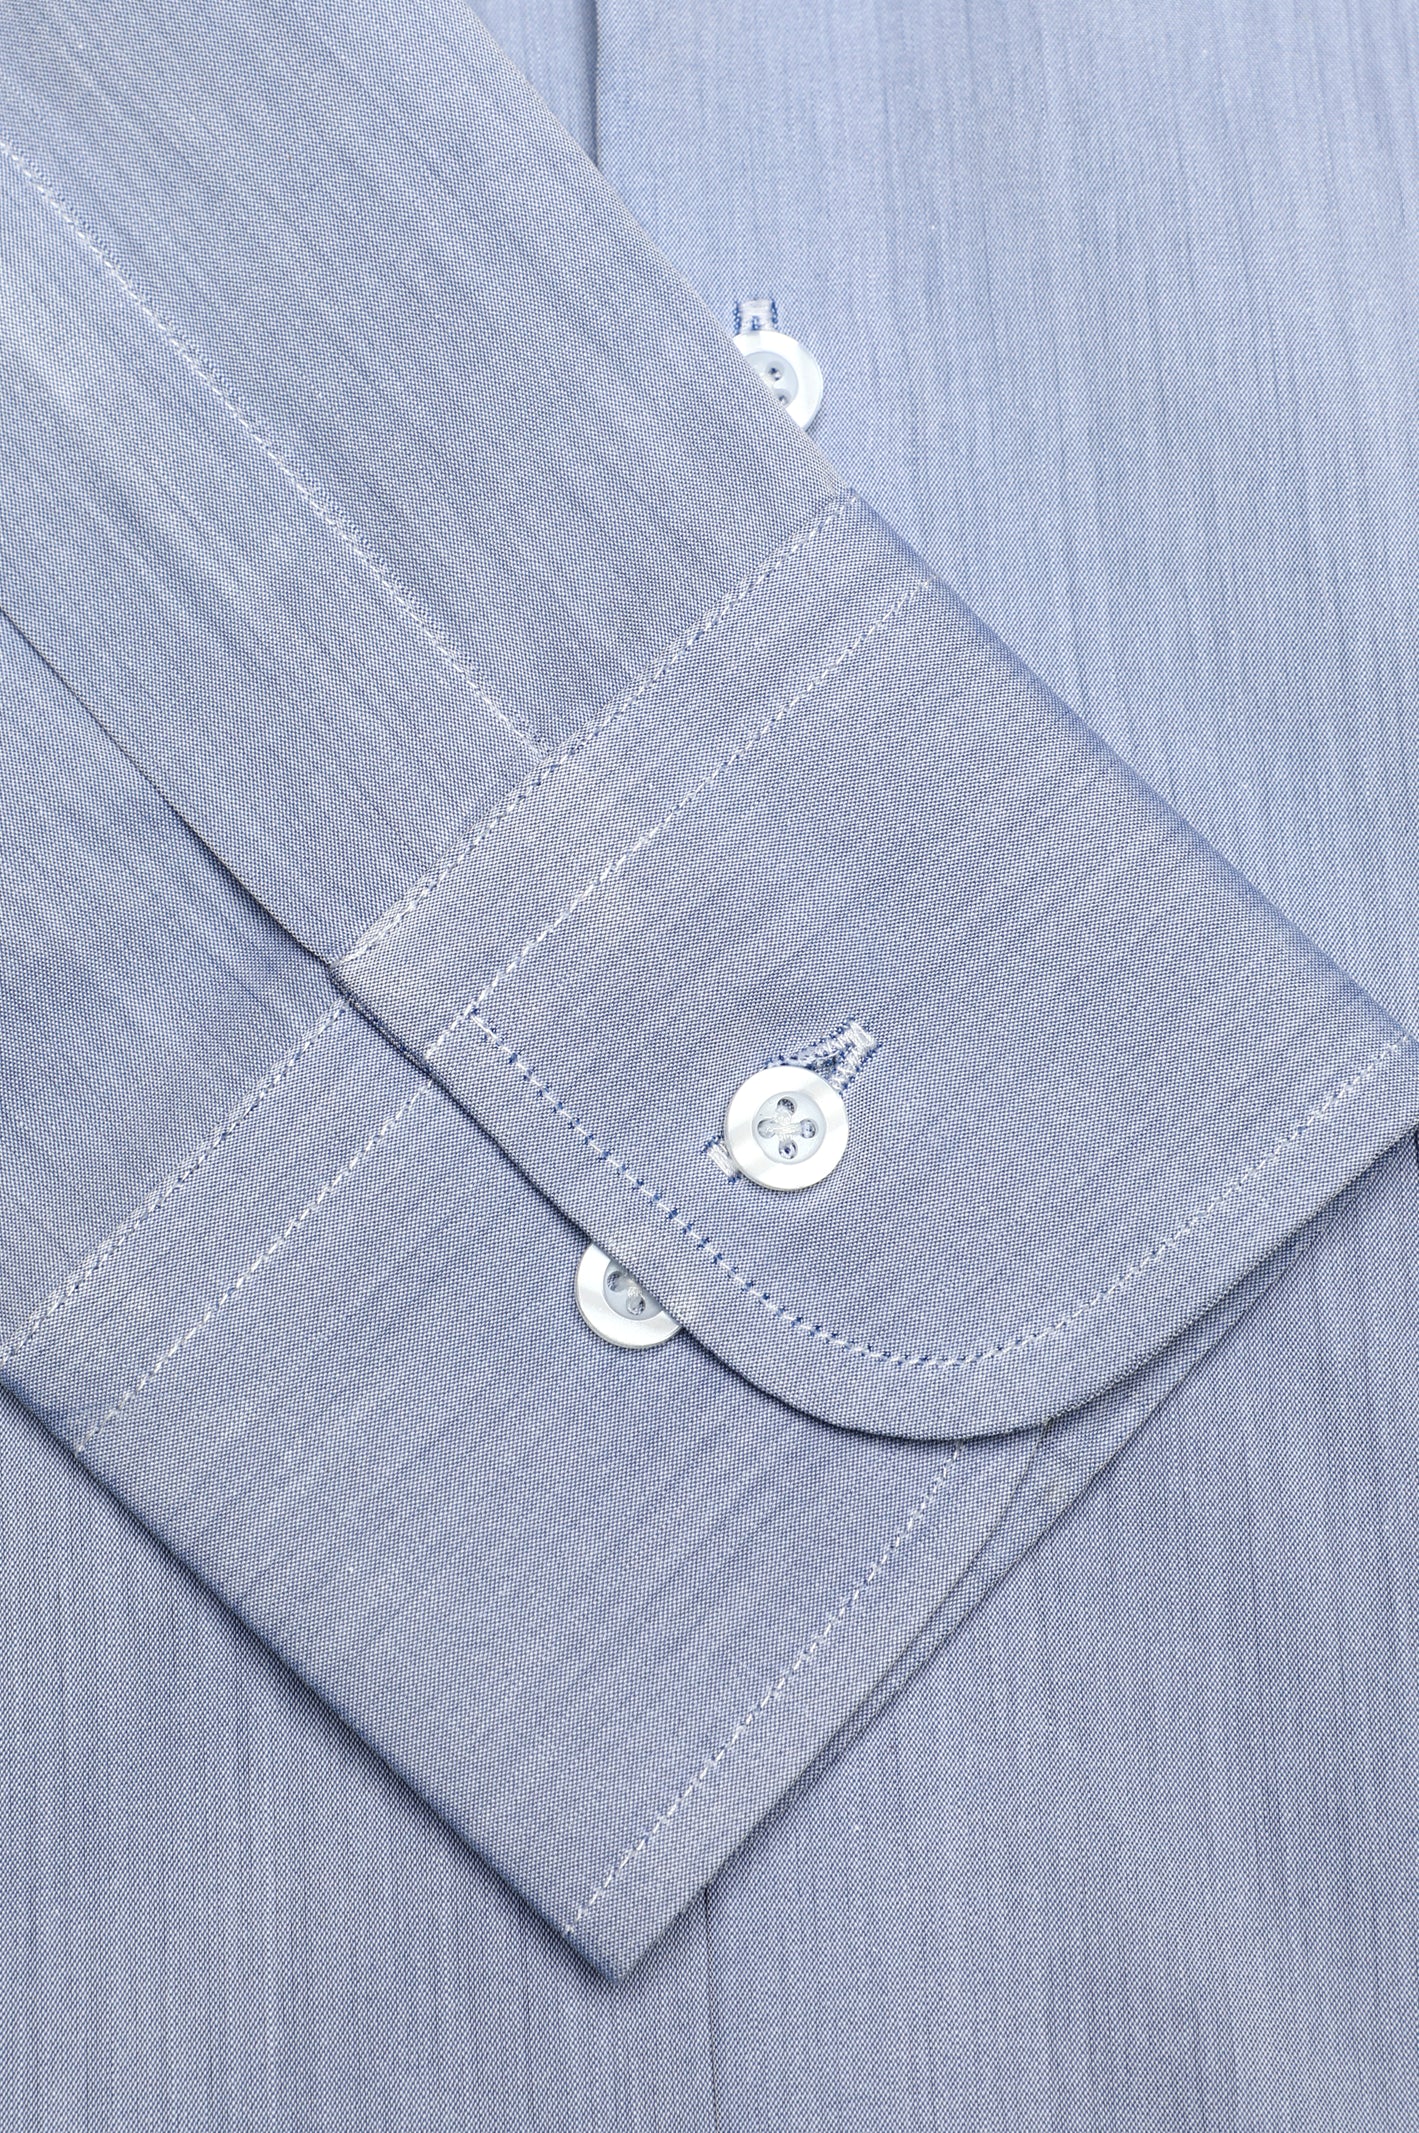 Light Blue Textured Formal Autograph Shirt From Diners